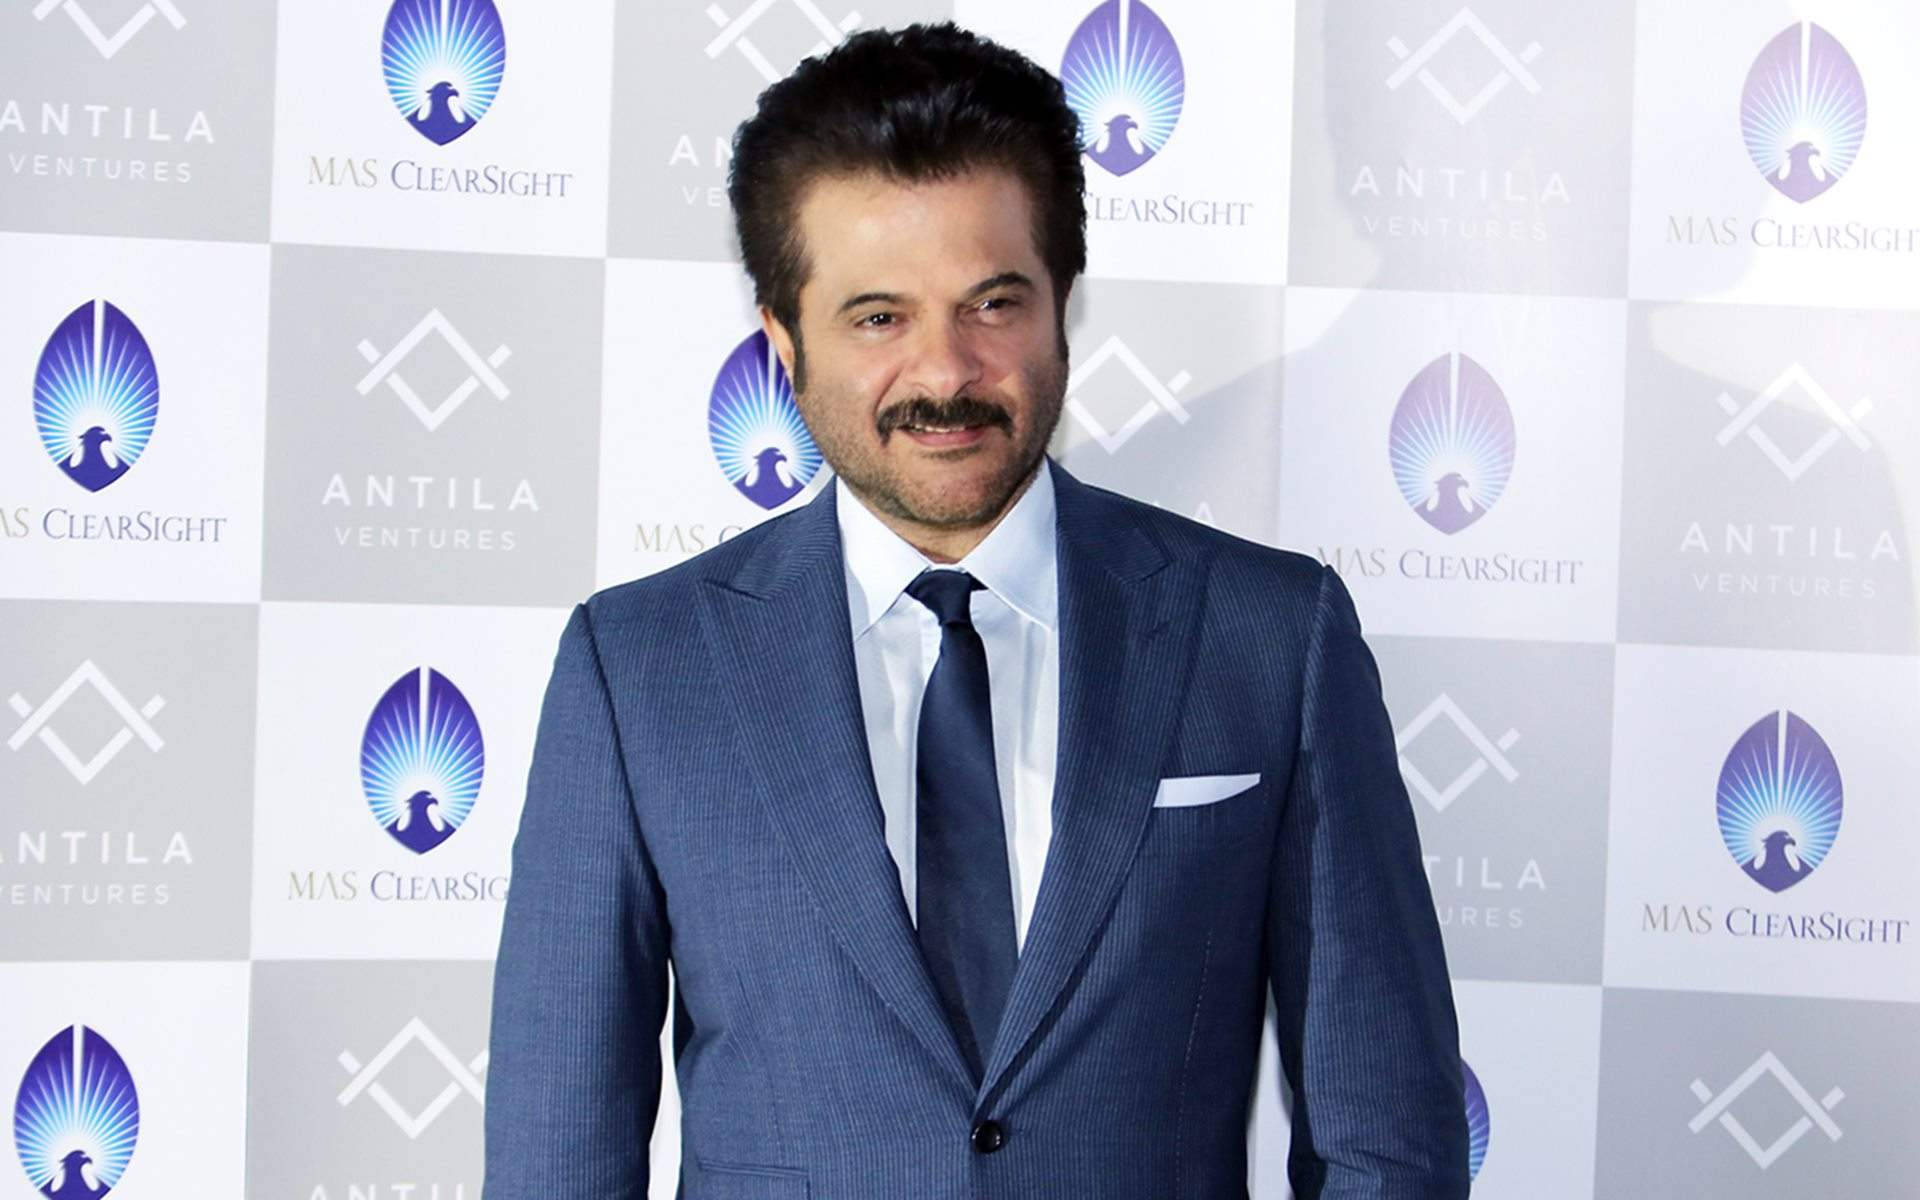 Anil Kapoor Mas Clearsight Background